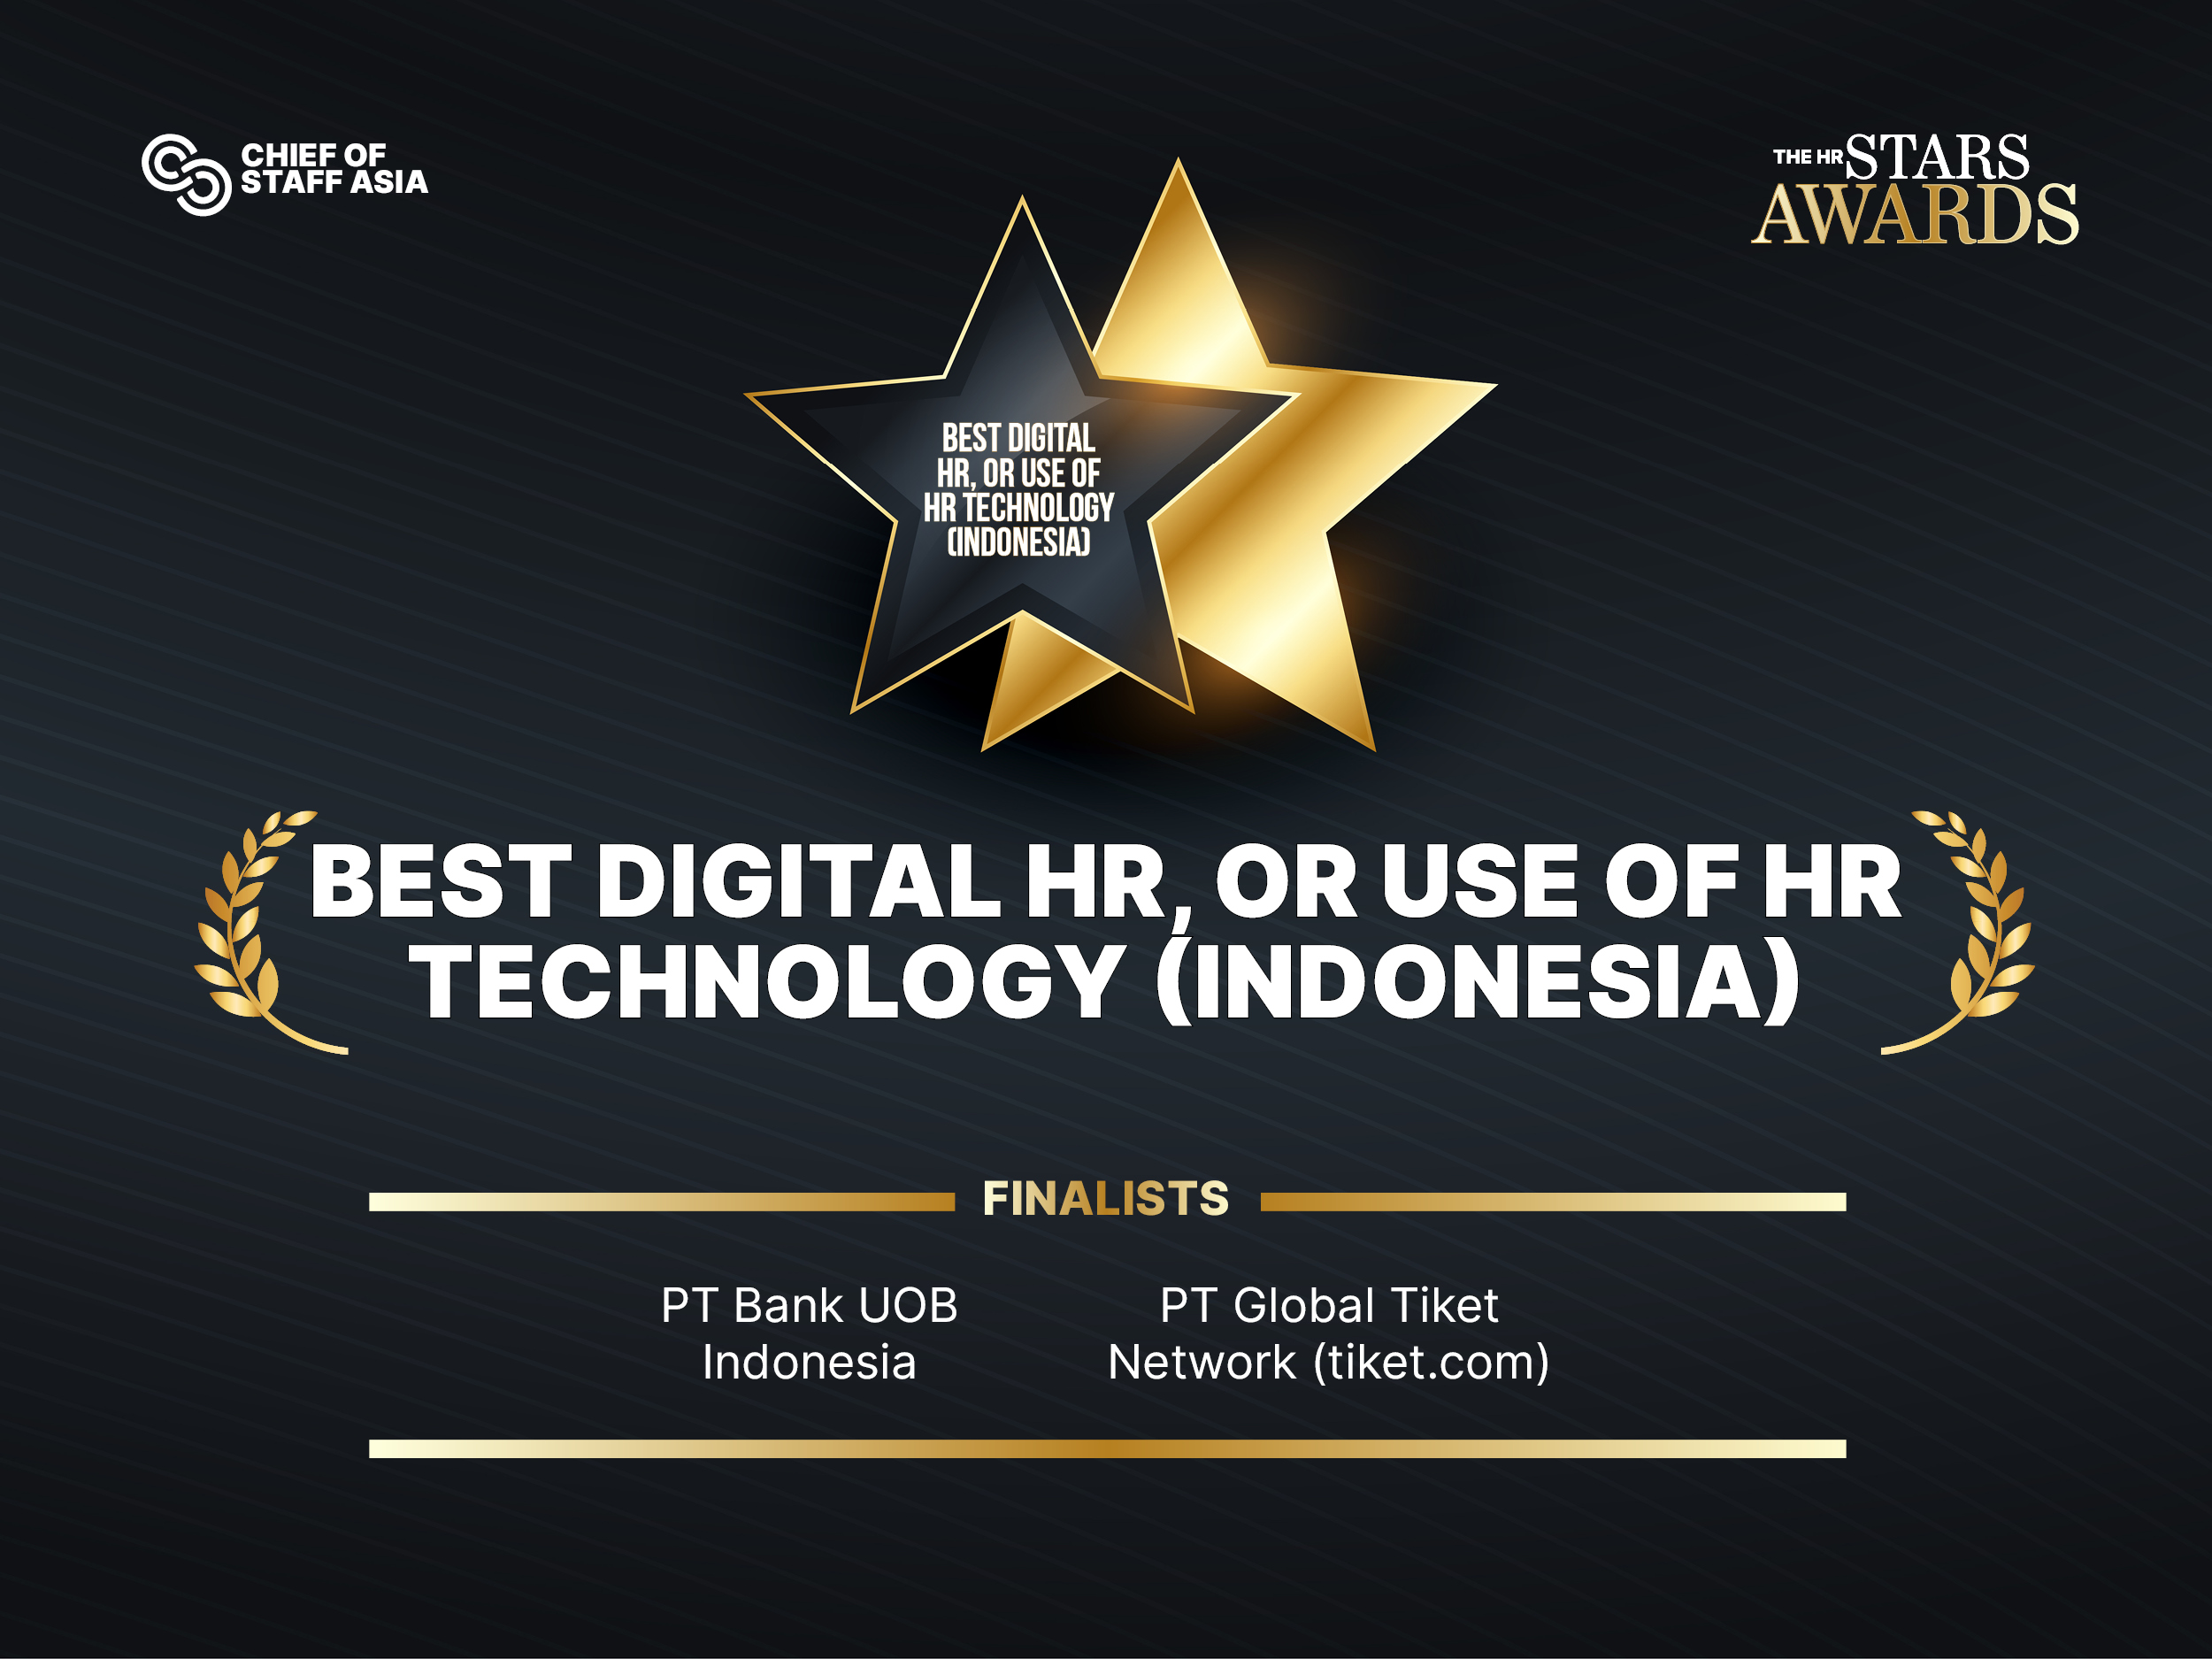 Best Digital HR, or use of HR Technology (Indonesia) Finalists